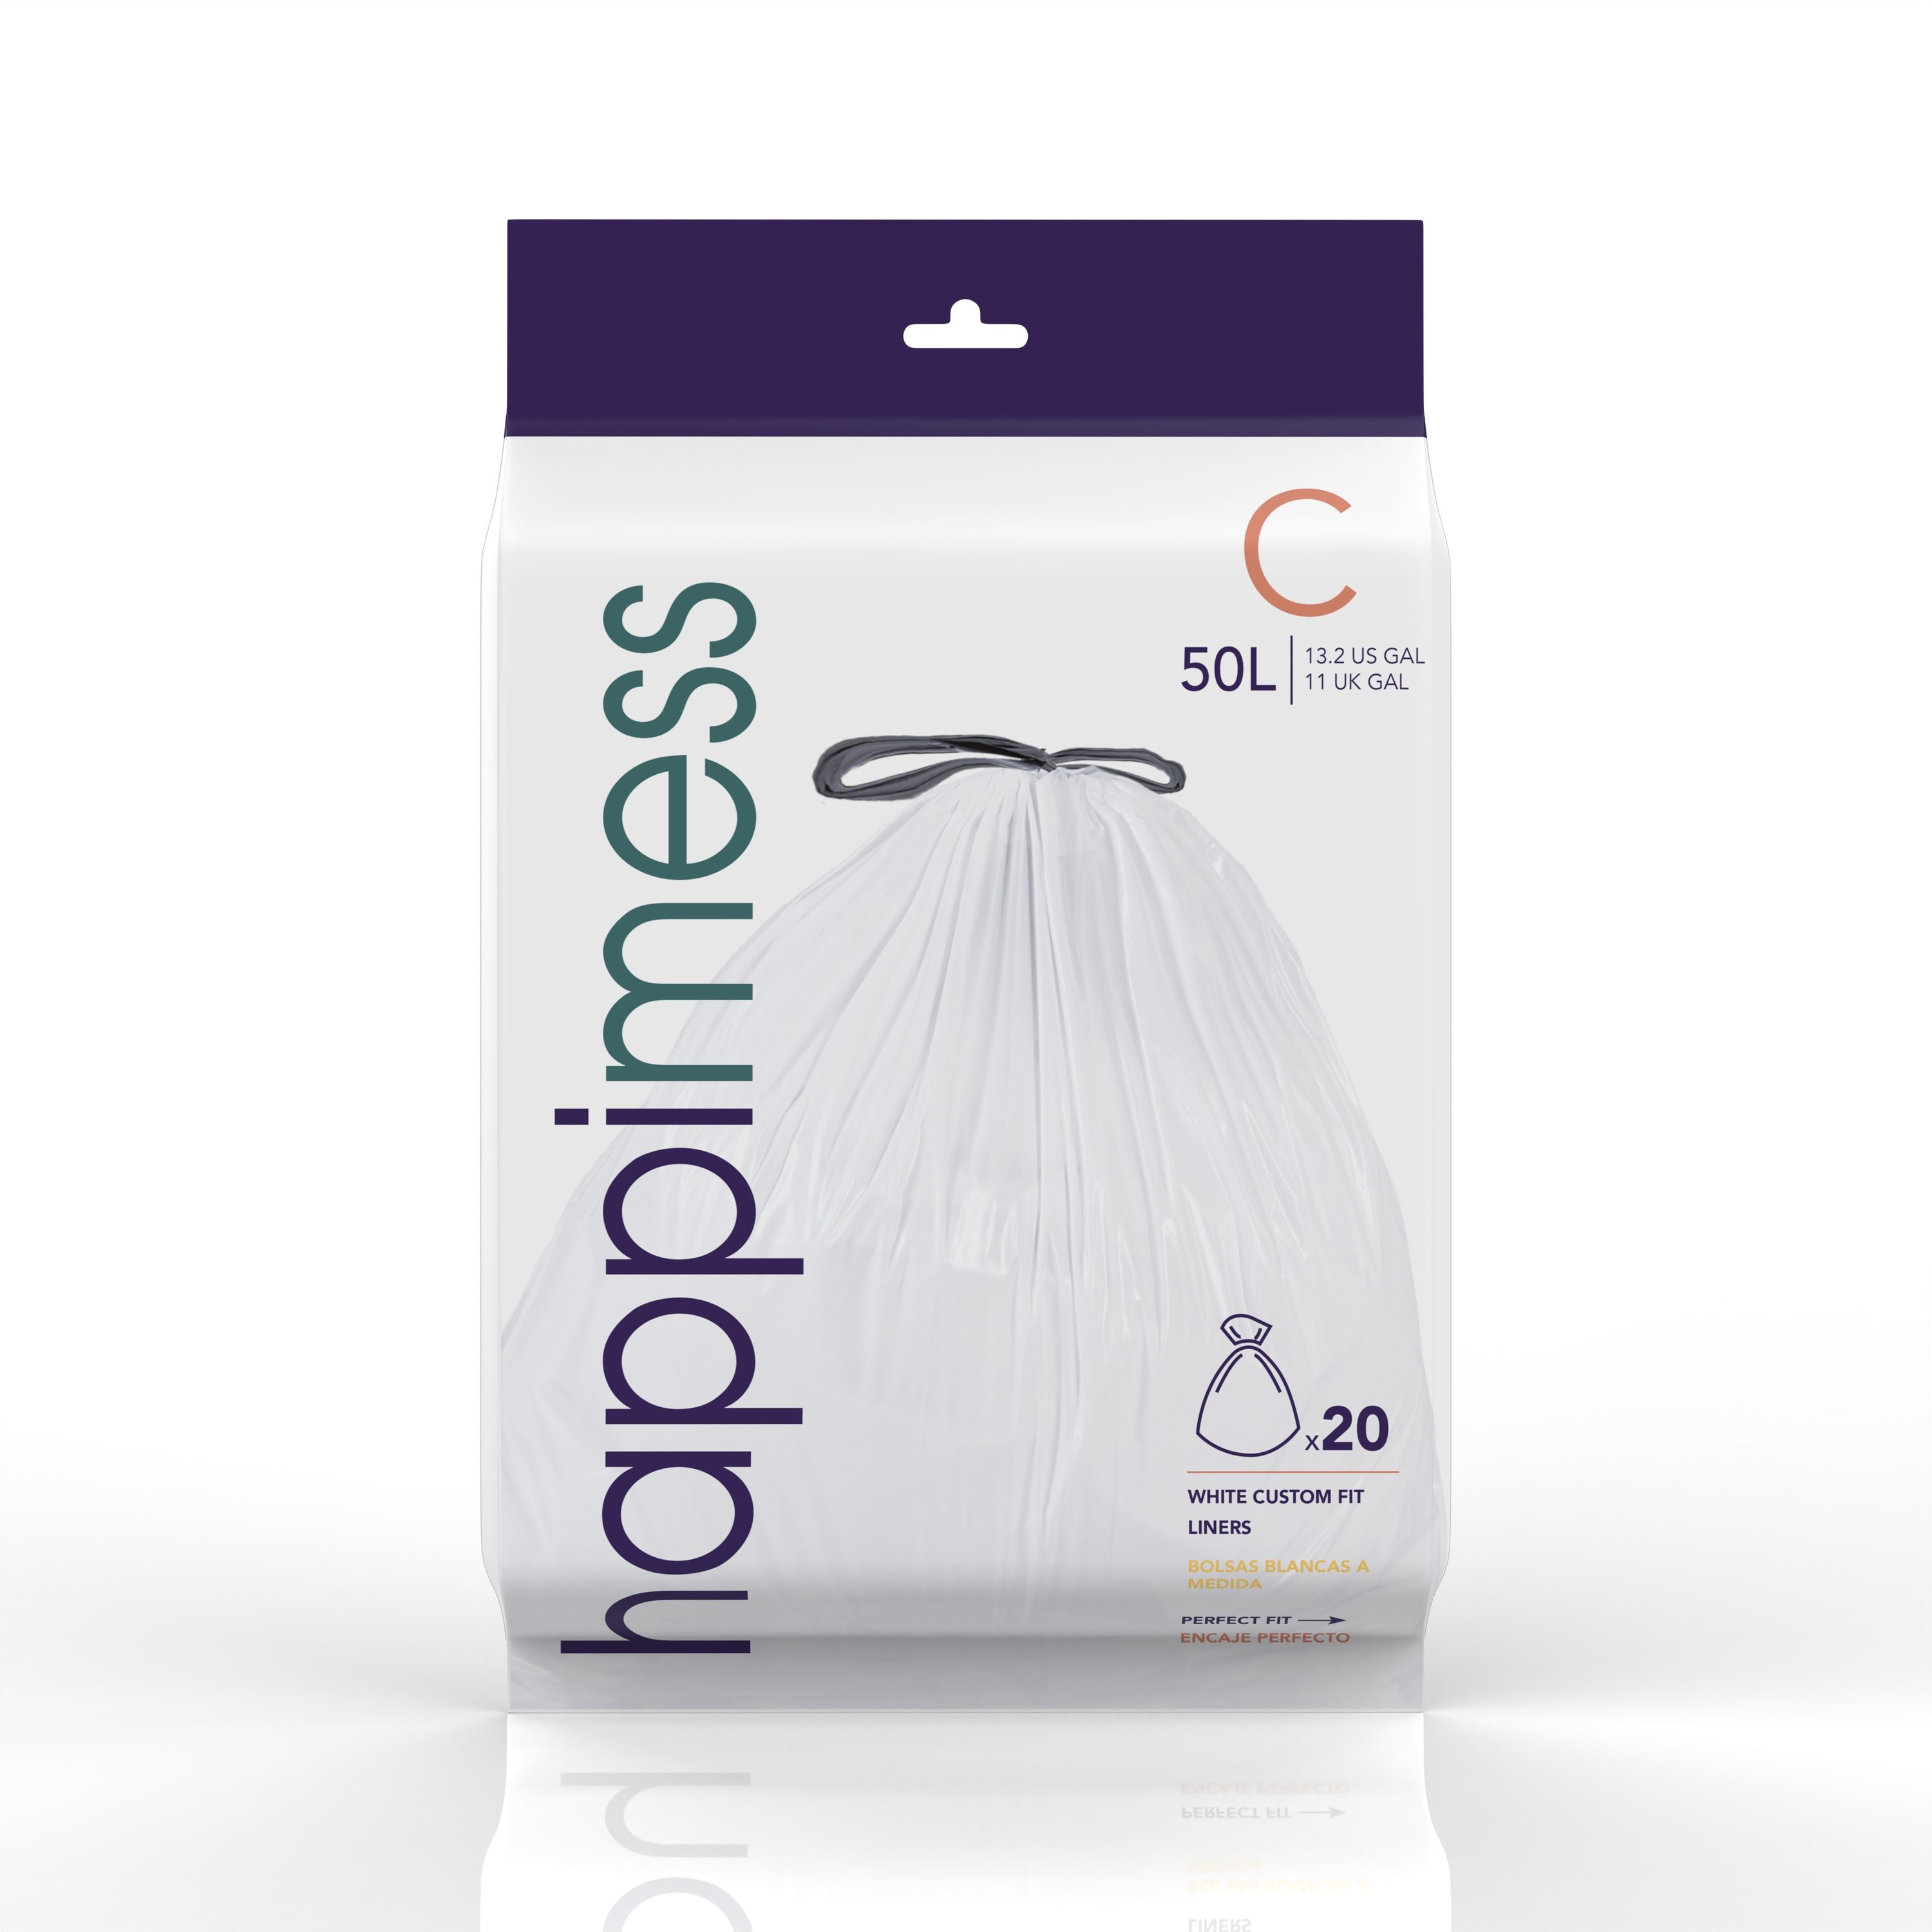 Tall White Garbage Bags – Grand City Supply